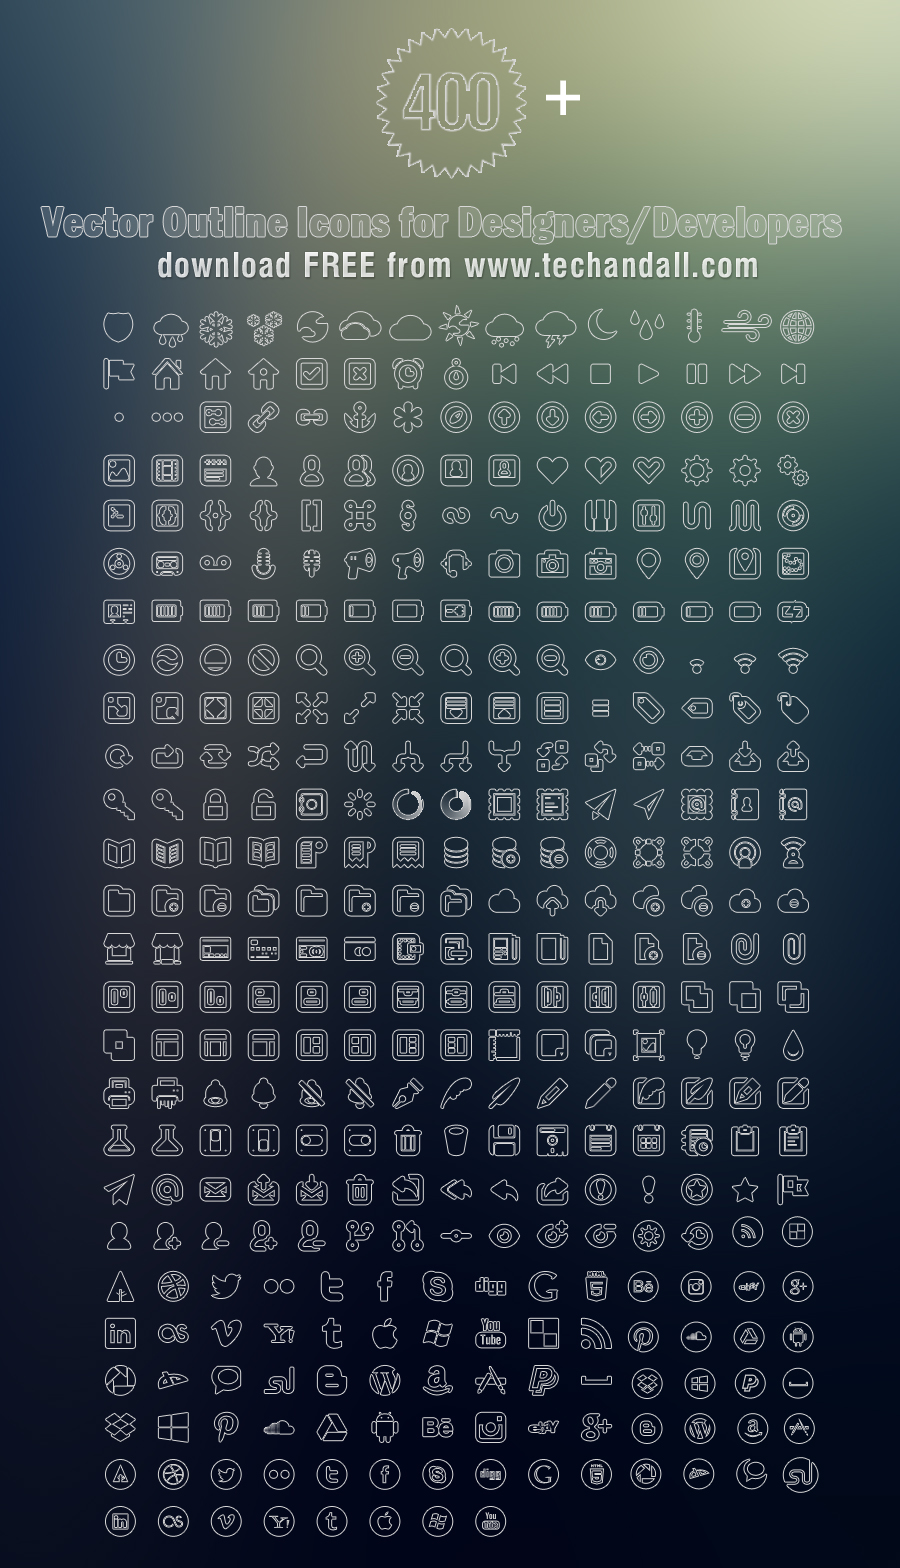 TechAndAll_400_Plus_vector_outline_icons